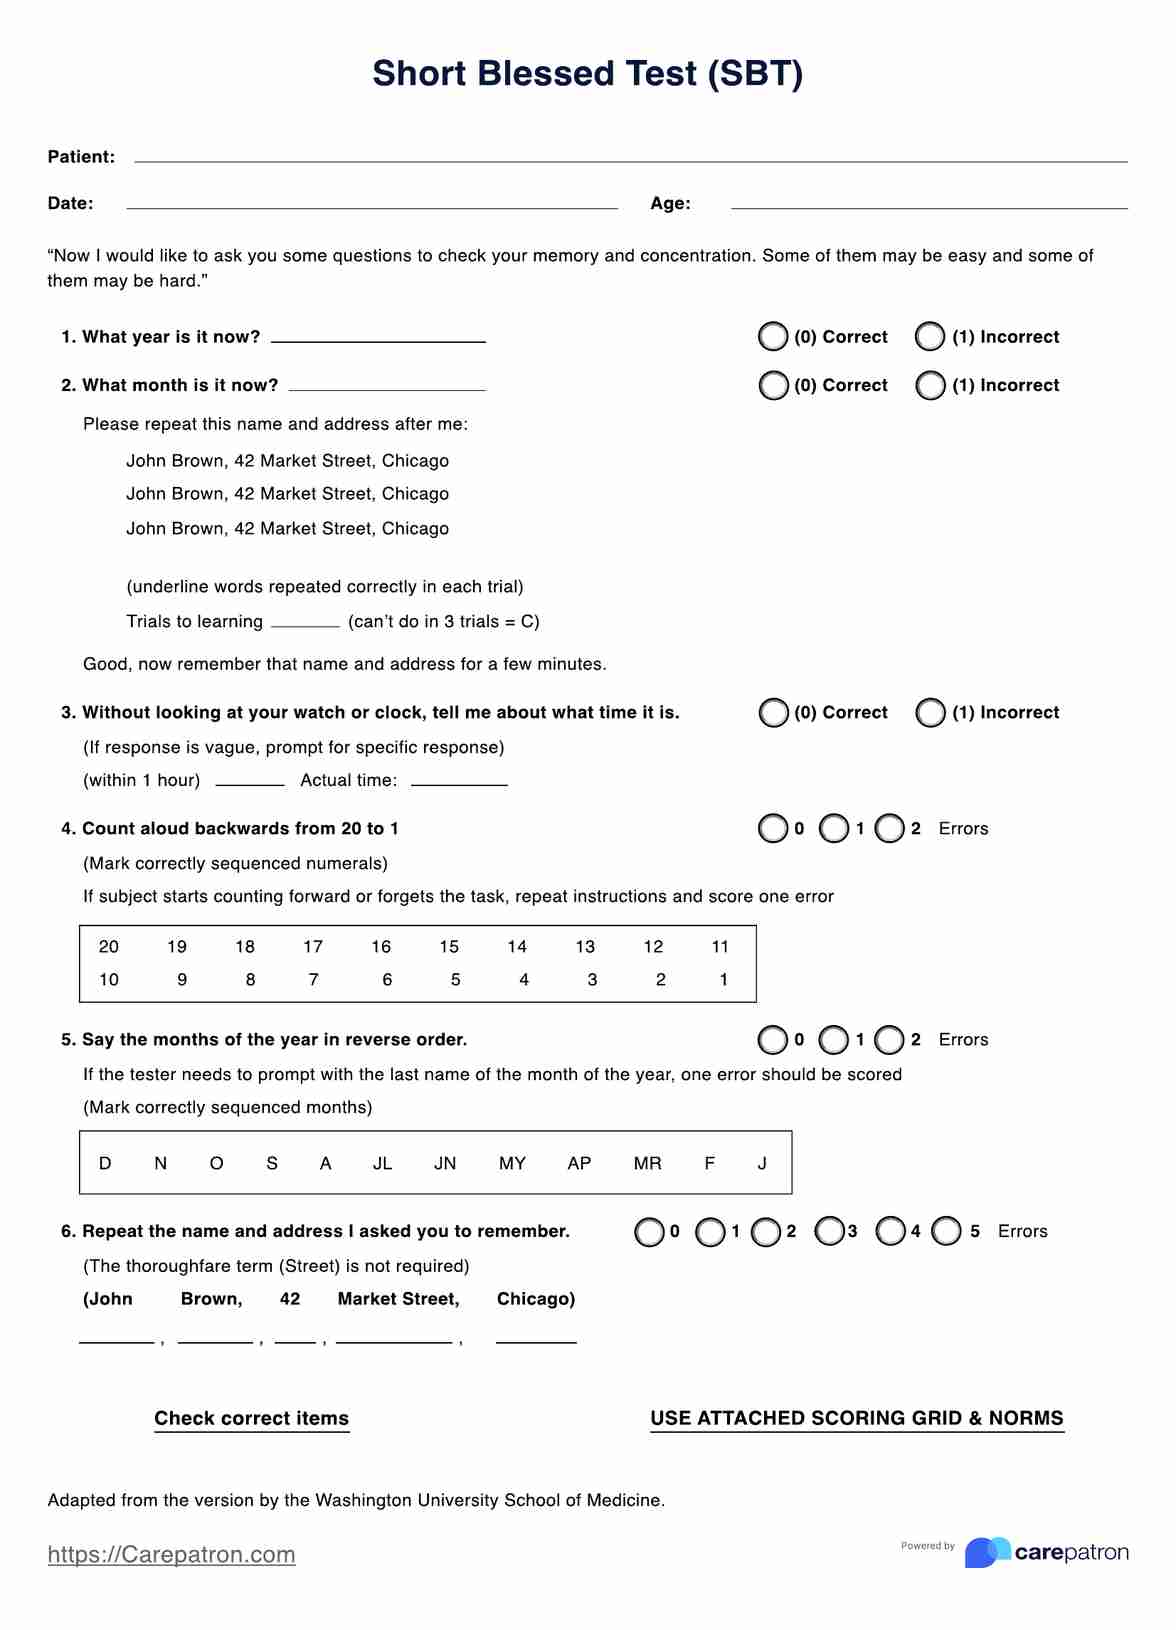 Short Blessed Test PDF Example